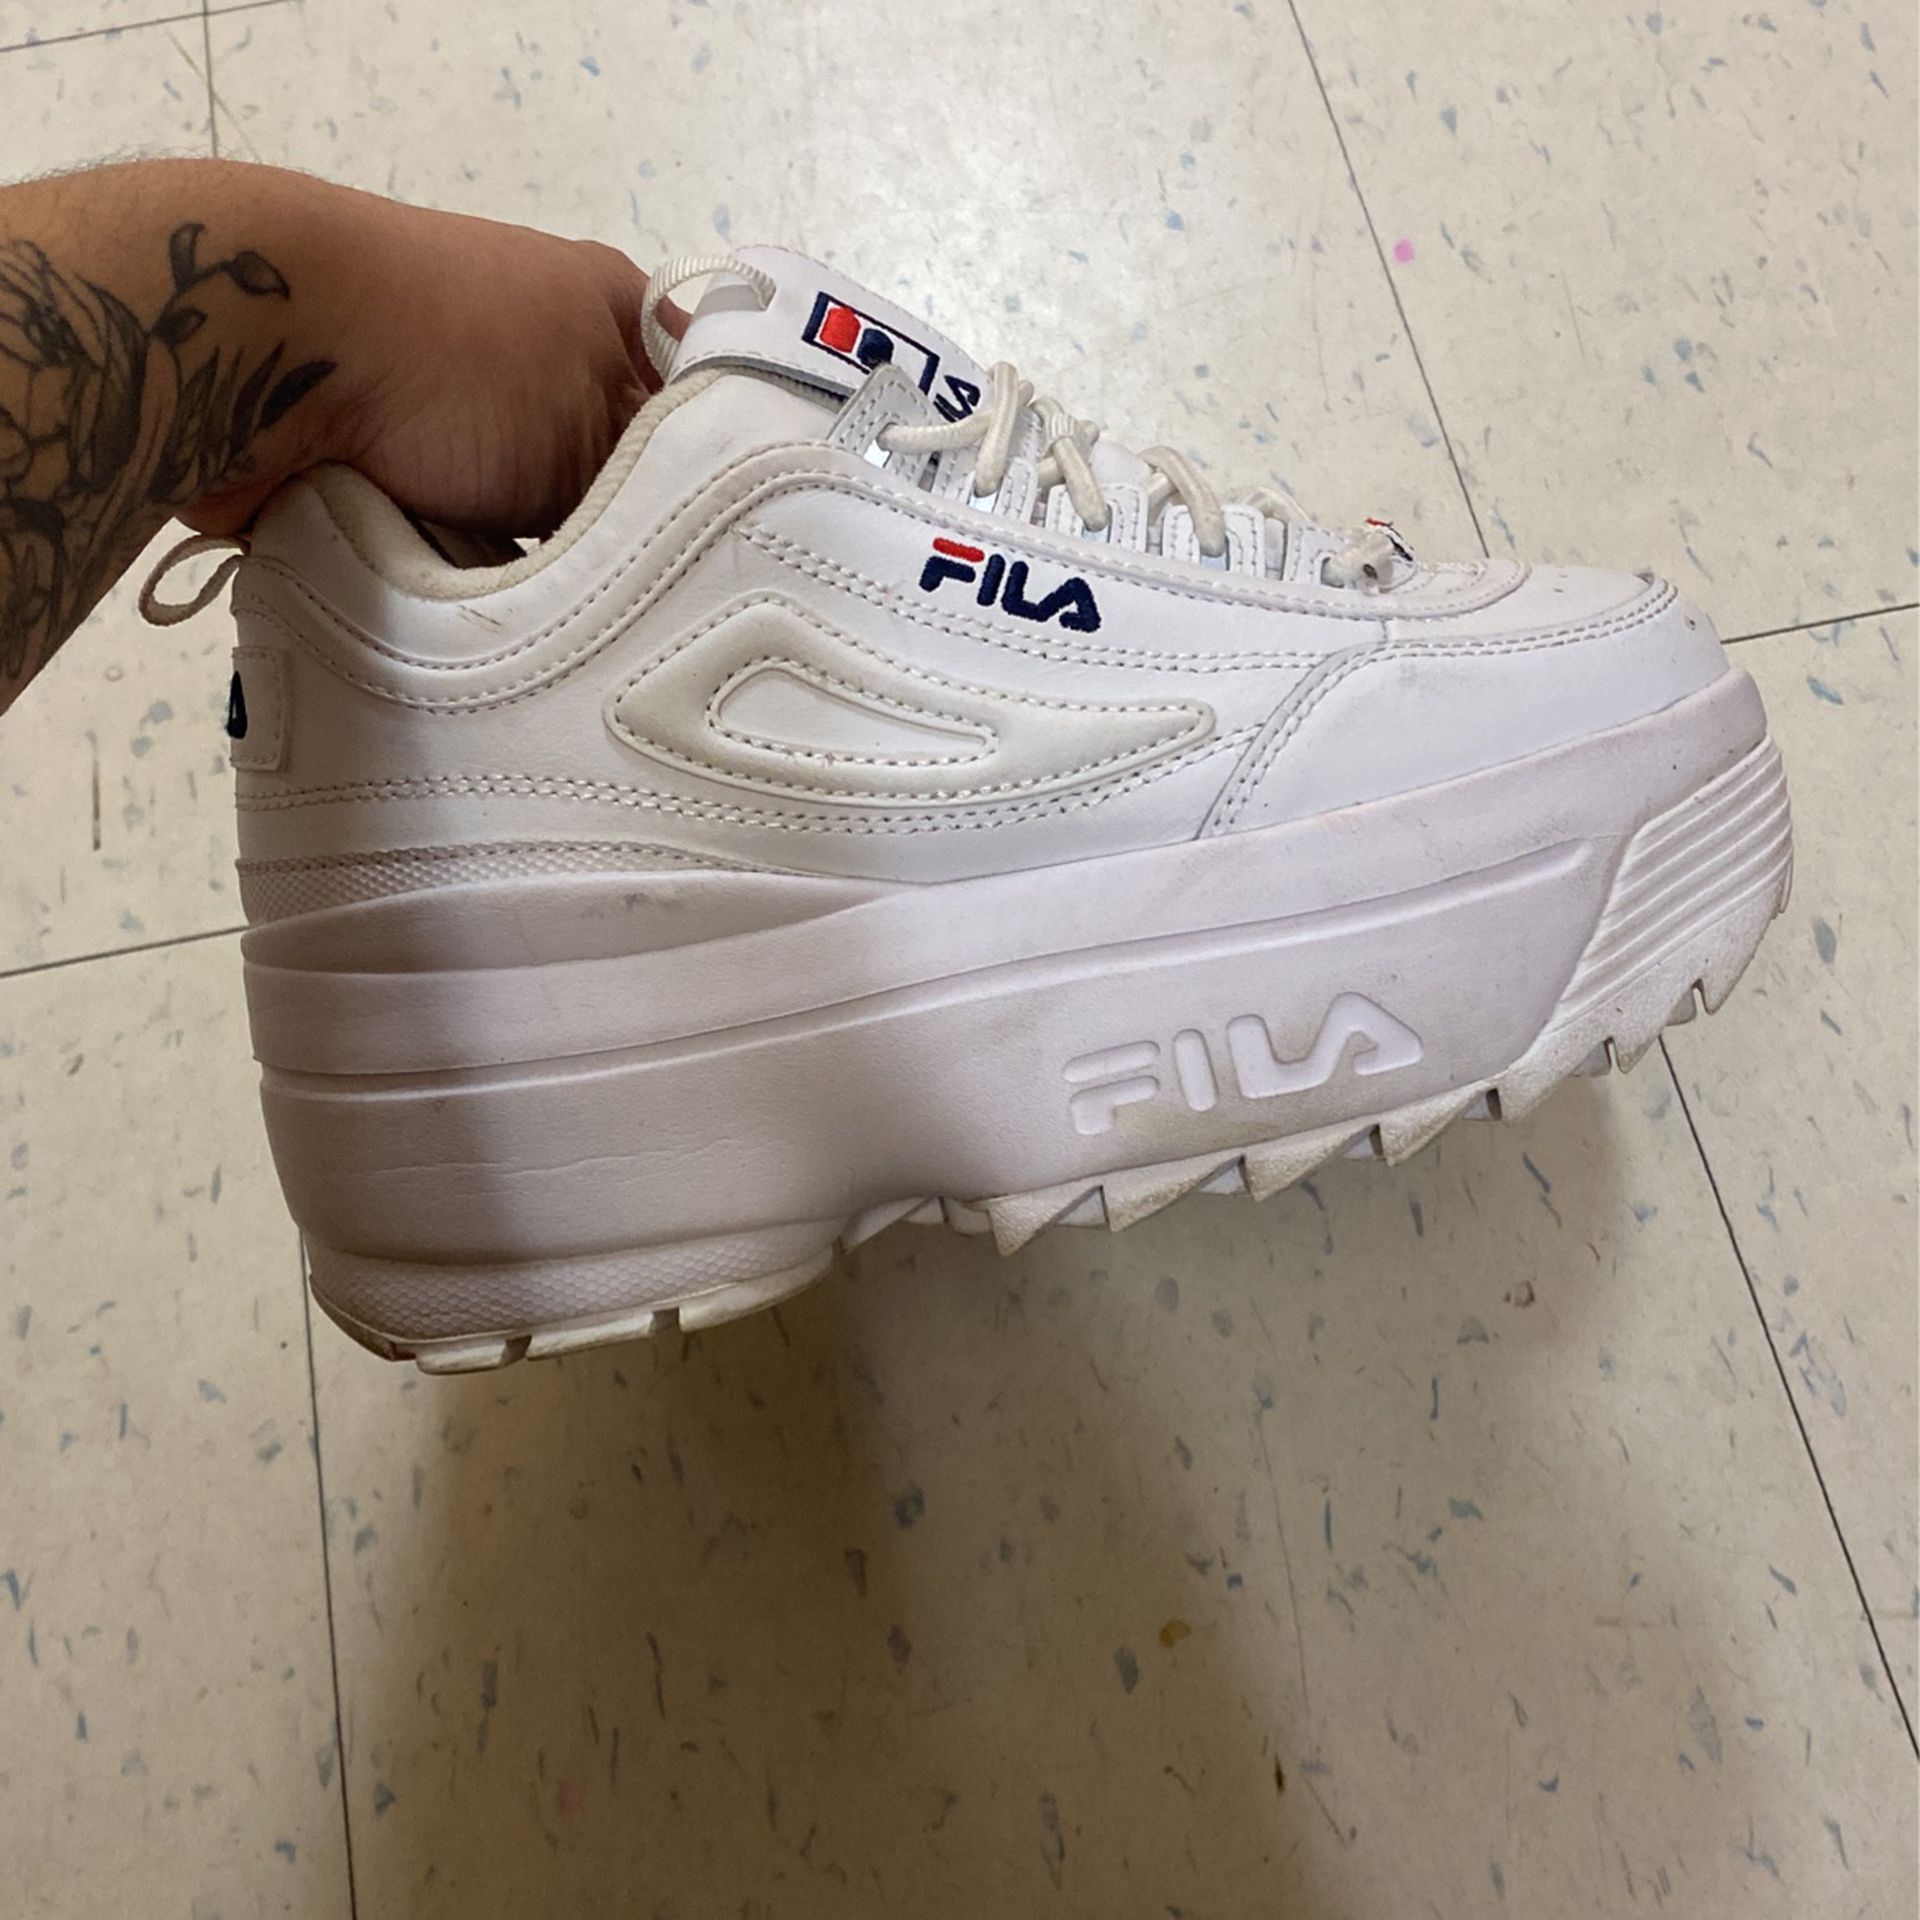 FILA Women's Platform Sneakers for Sale in New York, NY - OfferUp